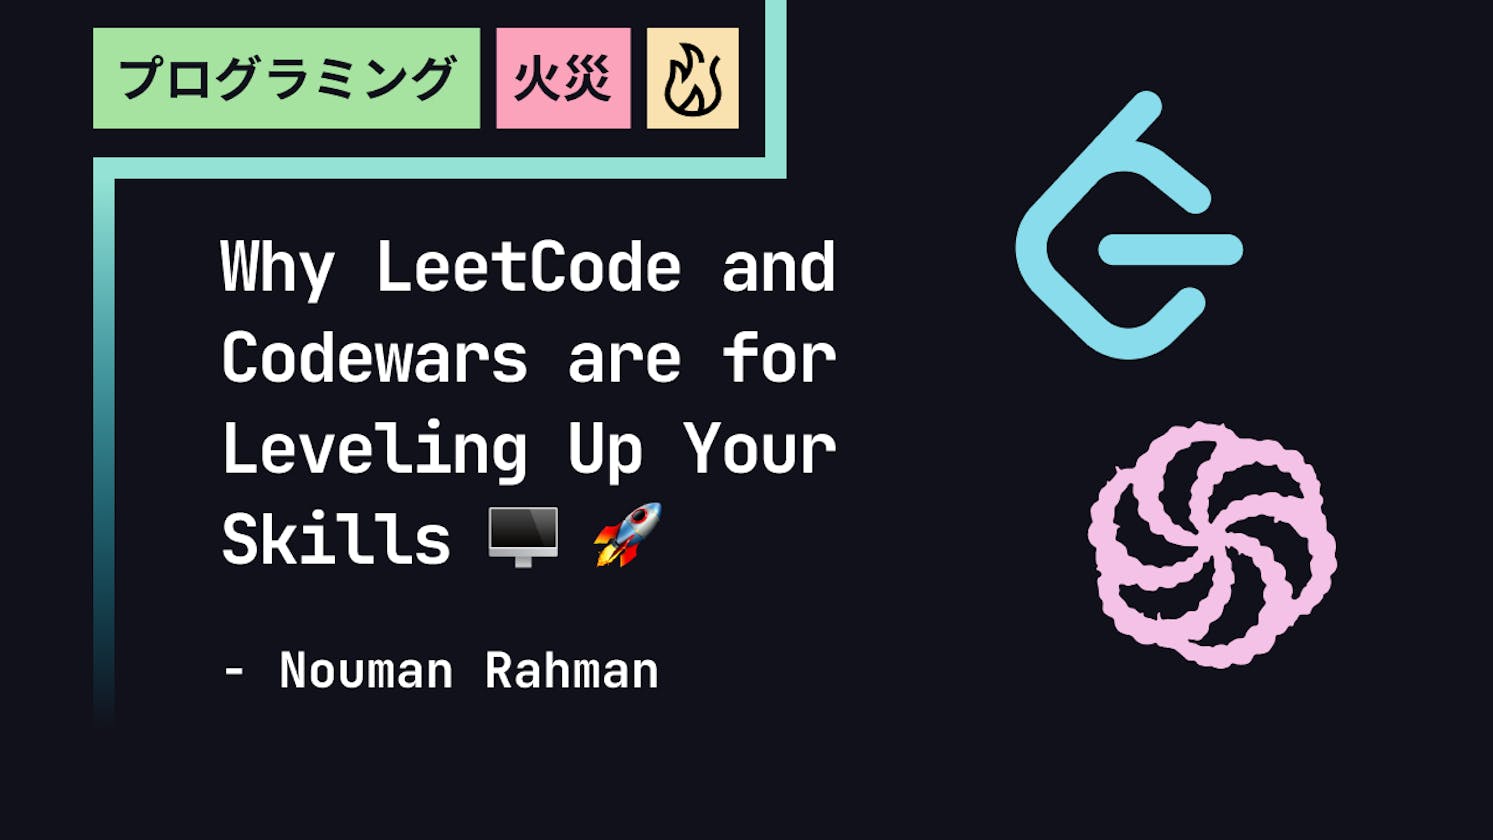 Why LeetCode and Codewars are Essential for Leveling Up Your Skills